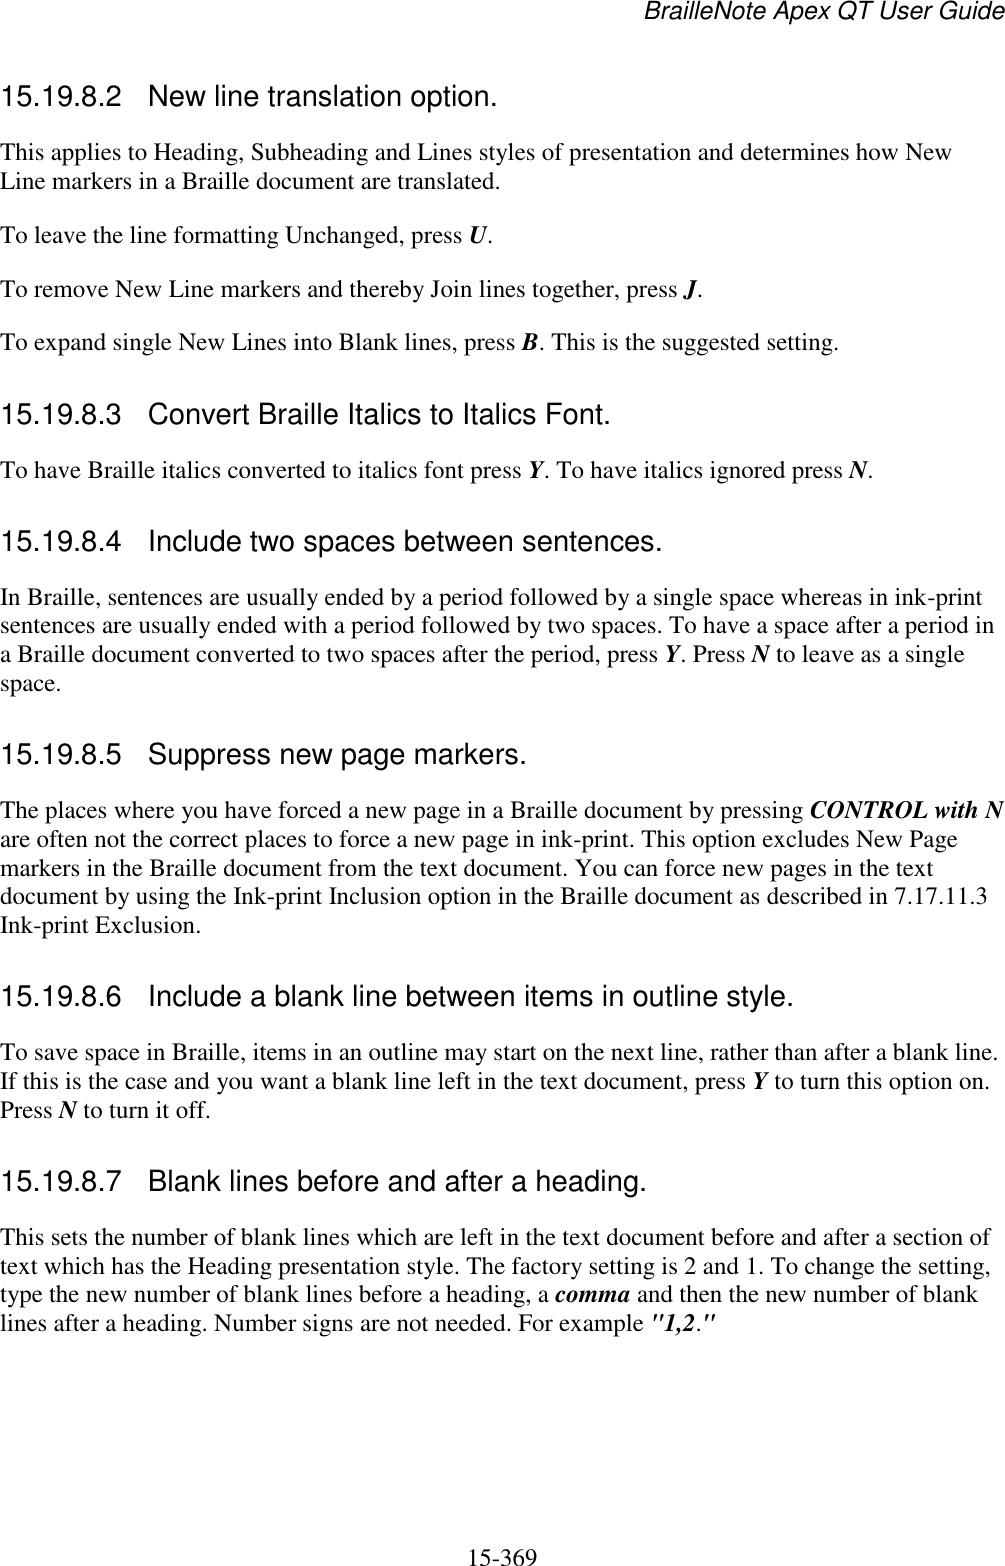 BrailleNote Apex QT User Guide  15-369   15.19.8.2  New line translation option. This applies to Heading, Subheading and Lines styles of presentation and determines how New Line markers in a Braille document are translated. To leave the line formatting Unchanged, press U. To remove New Line markers and thereby Join lines together, press J. To expand single New Lines into Blank lines, press B. This is the suggested setting.  15.19.8.3  Convert Braille Italics to Italics Font. To have Braille italics converted to italics font press Y. To have italics ignored press N.  15.19.8.4  Include two spaces between sentences. In Braille, sentences are usually ended by a period followed by a single space whereas in ink-print sentences are usually ended with a period followed by two spaces. To have a space after a period in a Braille document converted to two spaces after the period, press Y. Press N to leave as a single space.  15.19.8.5  Suppress new page markers. The places where you have forced a new page in a Braille document by pressing CONTROL with N are often not the correct places to force a new page in ink-print. This option excludes New Page markers in the Braille document from the text document. You can force new pages in the text document by using the Ink-print Inclusion option in the Braille document as described in 7.17.11.3 Ink-print Exclusion.  15.19.8.6  Include a blank line between items in outline style. To save space in Braille, items in an outline may start on the next line, rather than after a blank line. If this is the case and you want a blank line left in the text document, press Y to turn this option on. Press N to turn it off.  15.19.8.7  Blank lines before and after a heading. This sets the number of blank lines which are left in the text document before and after a section of text which has the Heading presentation style. The factory setting is 2 and 1. To change the setting, type the new number of blank lines before a heading, a comma and then the new number of blank lines after a heading. Number signs are not needed. For example &quot;1,2.&quot;  